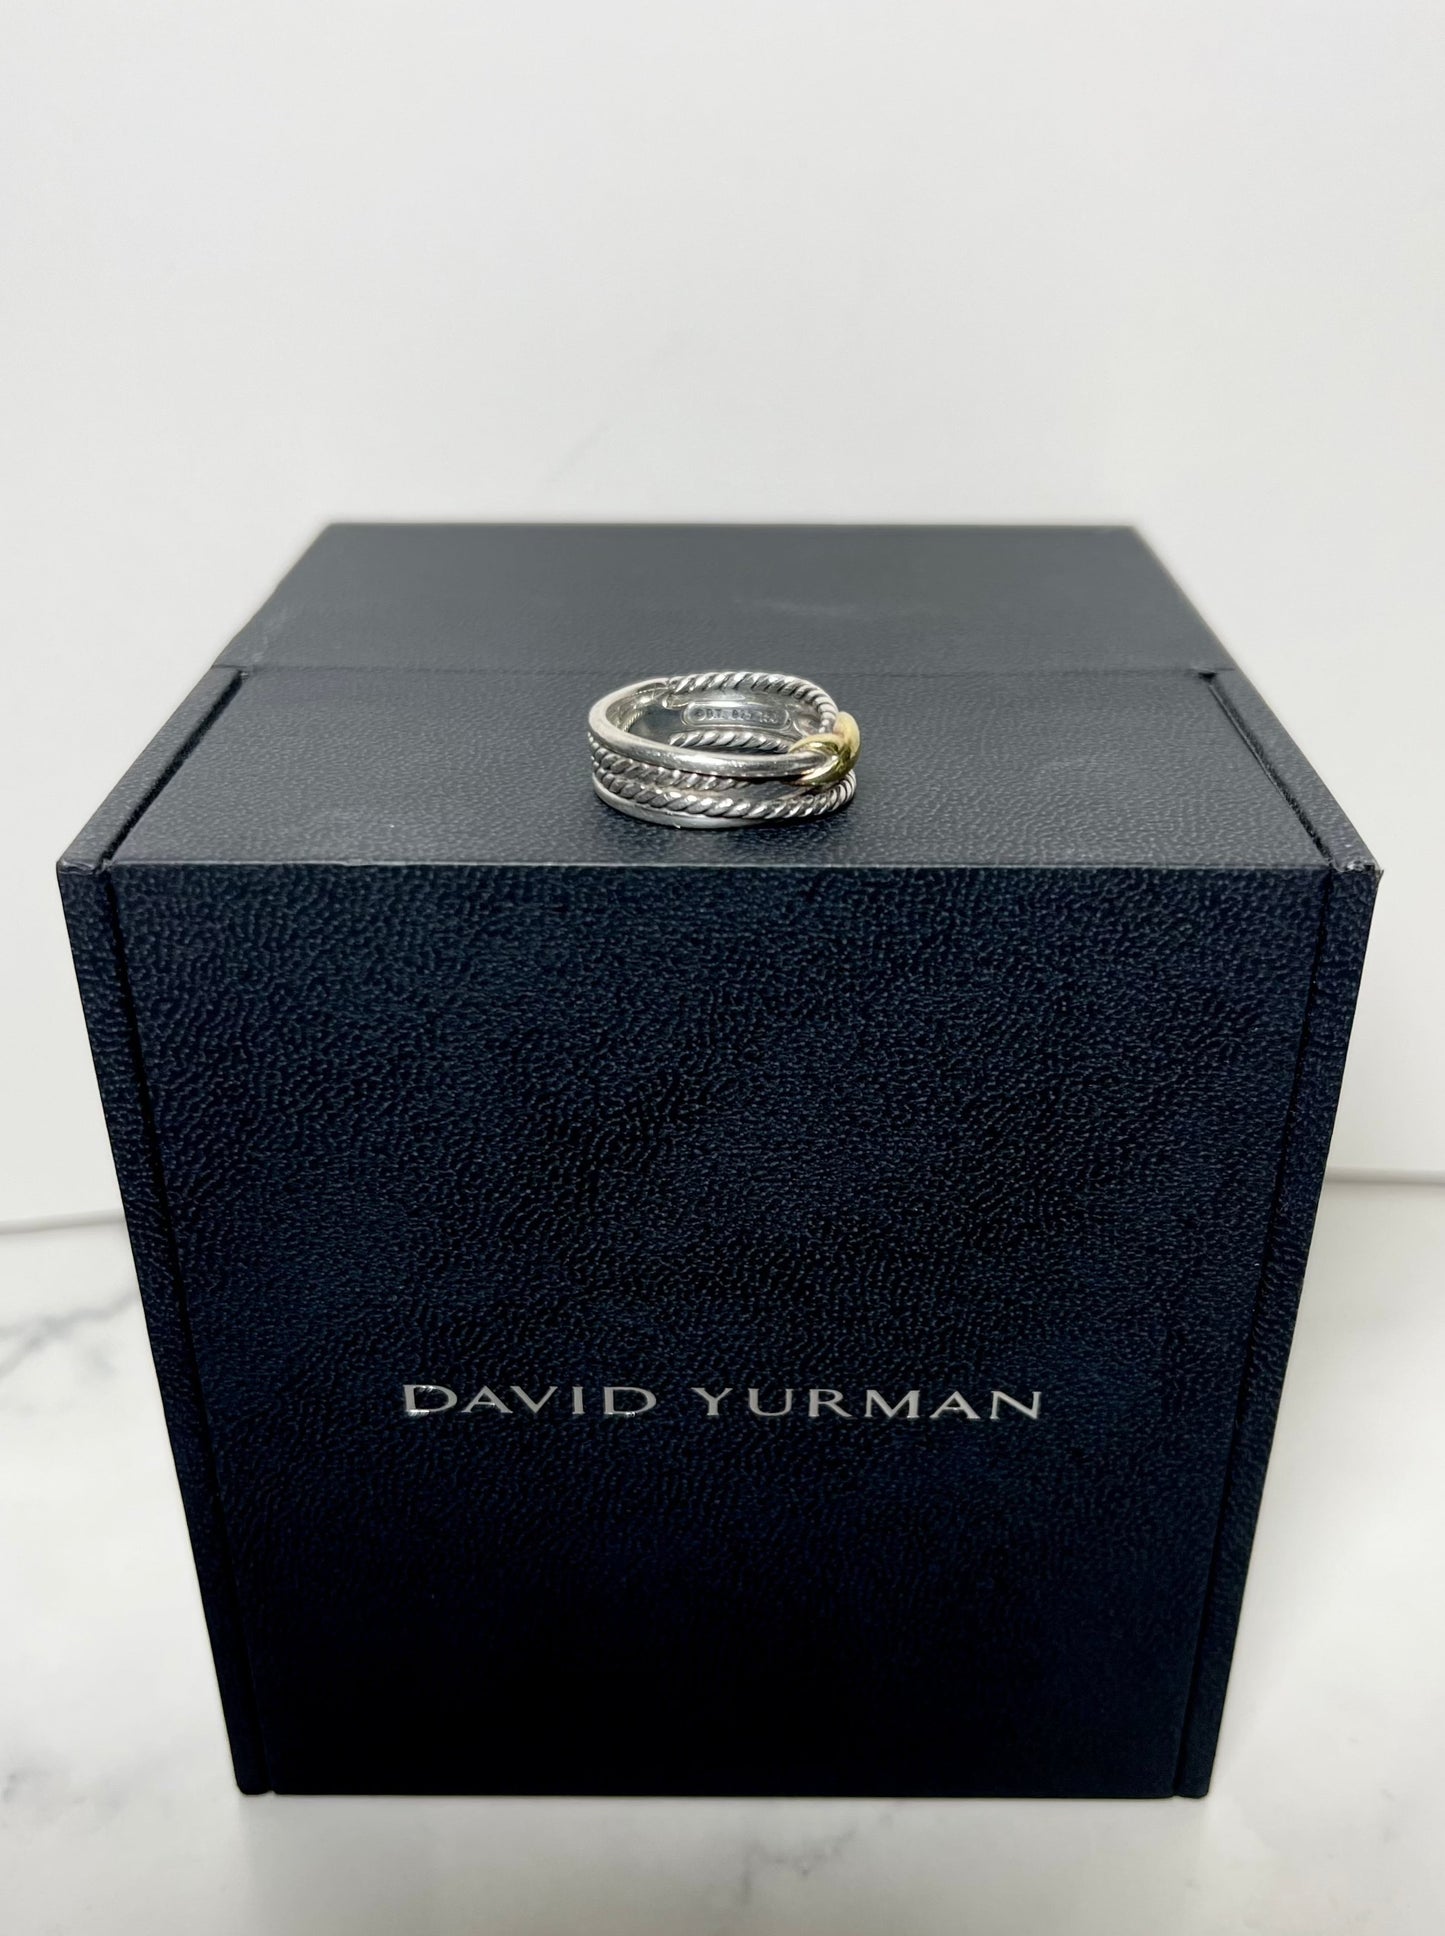 David Yurman X Crossover Band Ring in Sterling Silver with 18K Yellow Gold